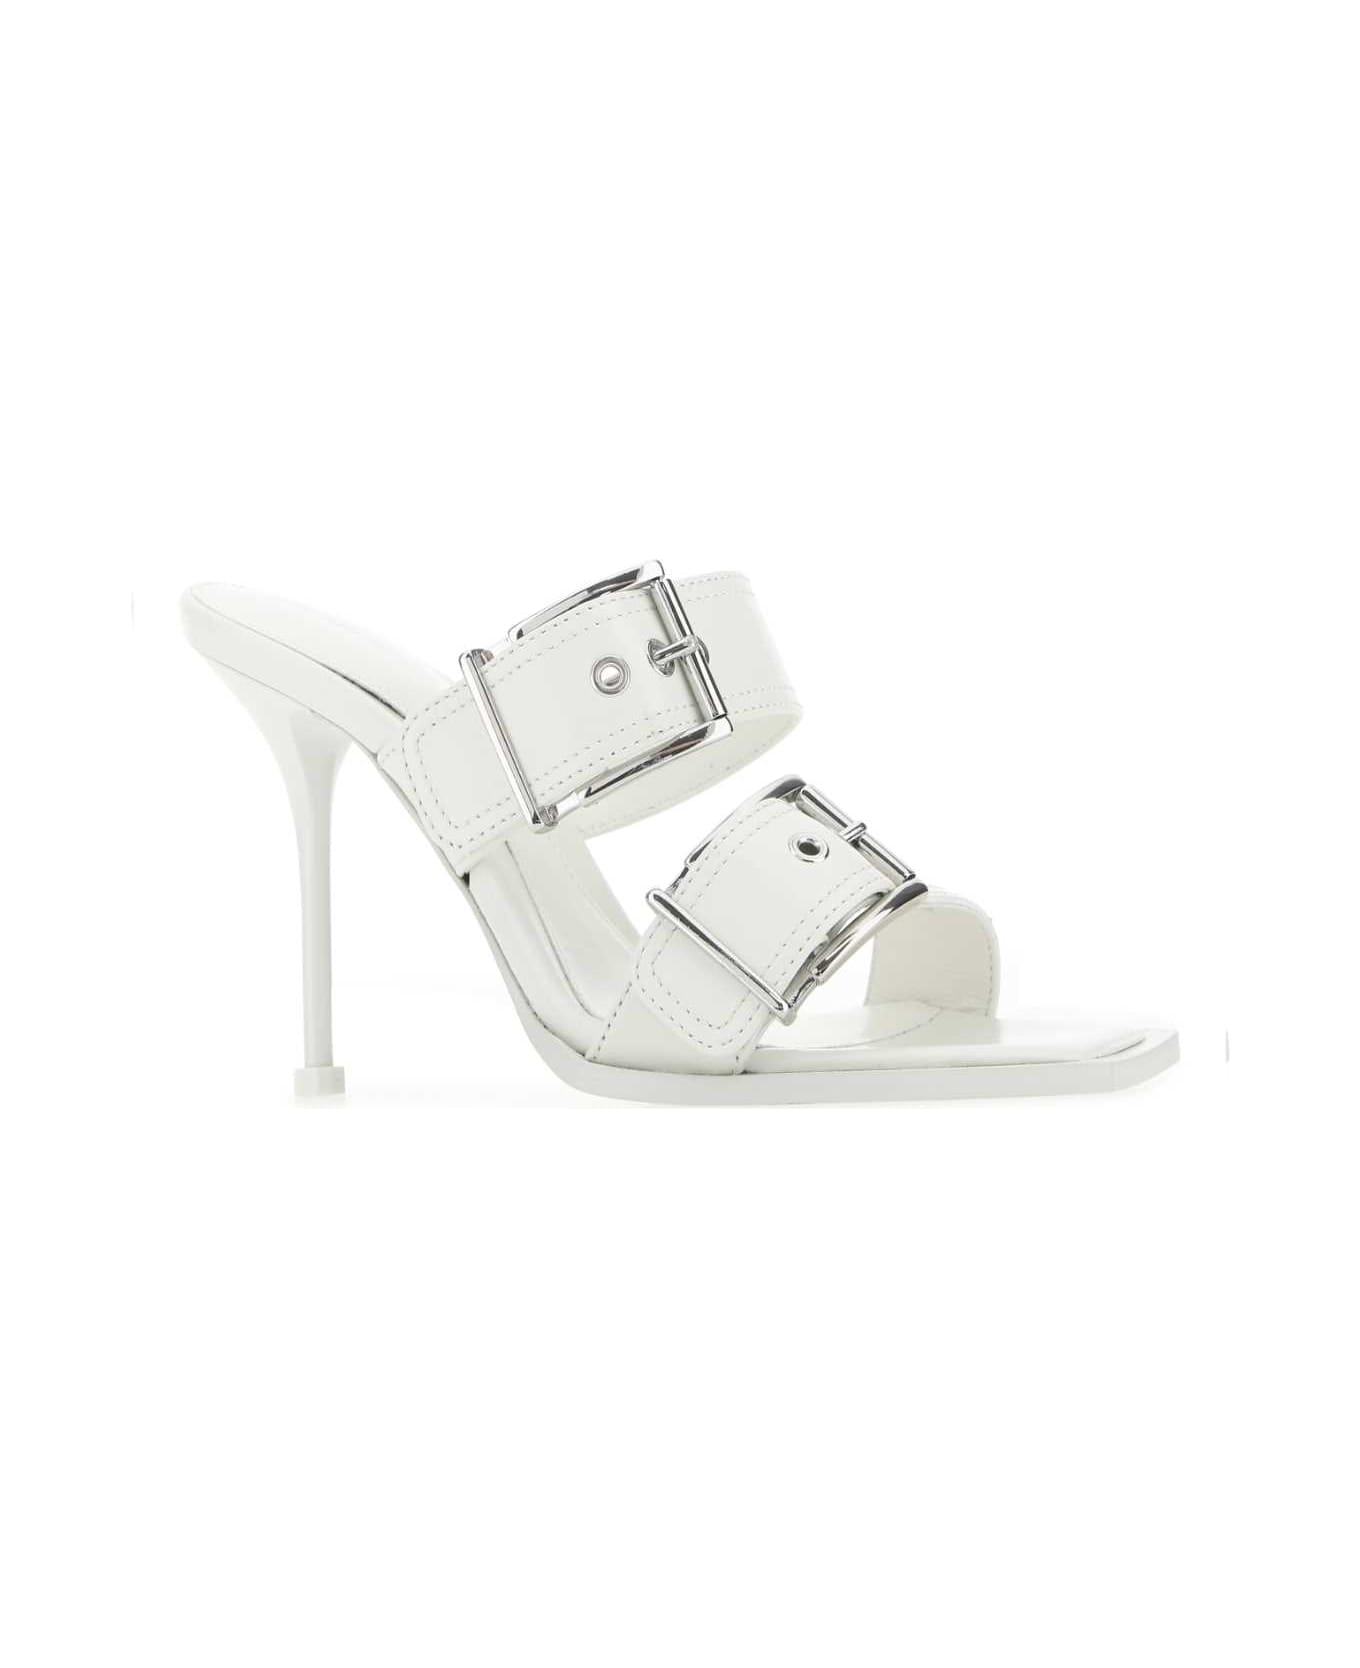 Alexander McQueen White Leather Mules - 9359 サンダル